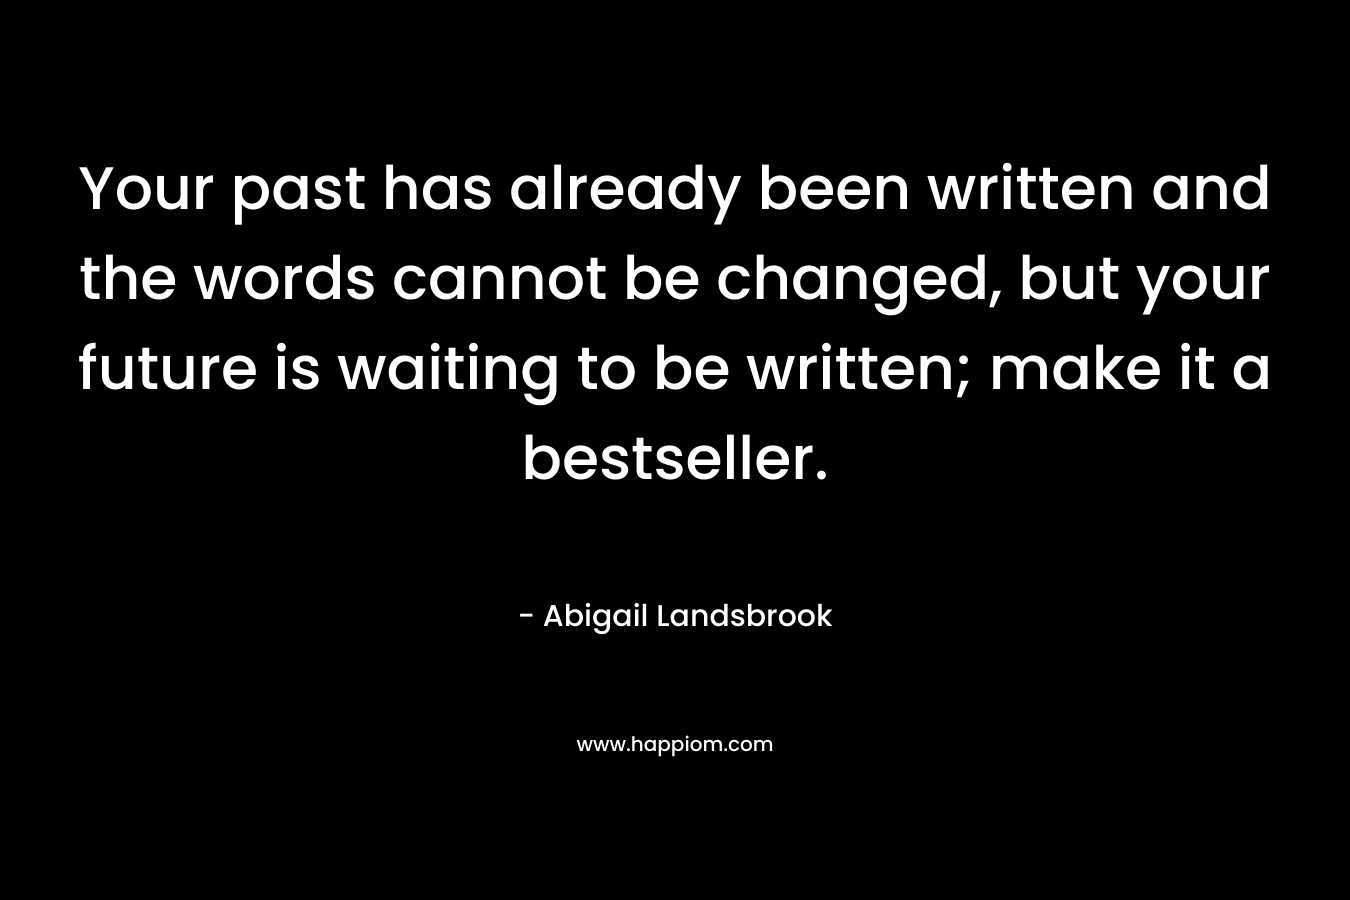 Your past has already been written and the words cannot be changed, but your future is waiting to be written; make it a bestseller.